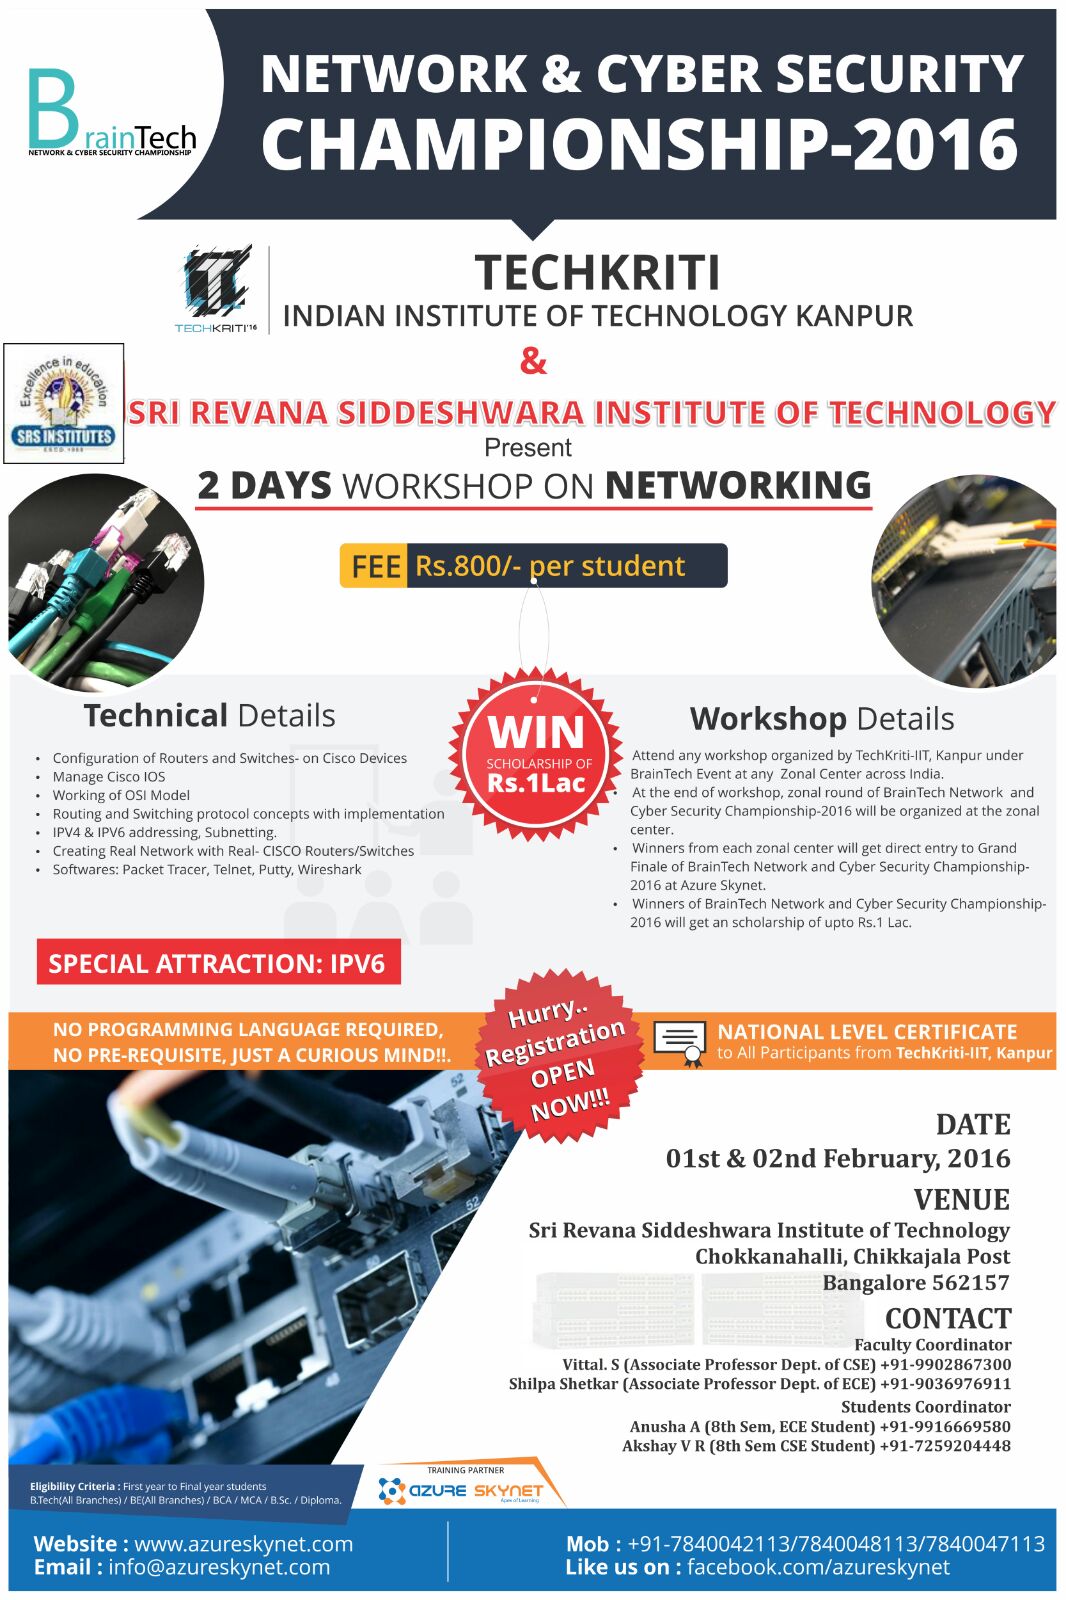 Network & Cyber Security Championship -2016